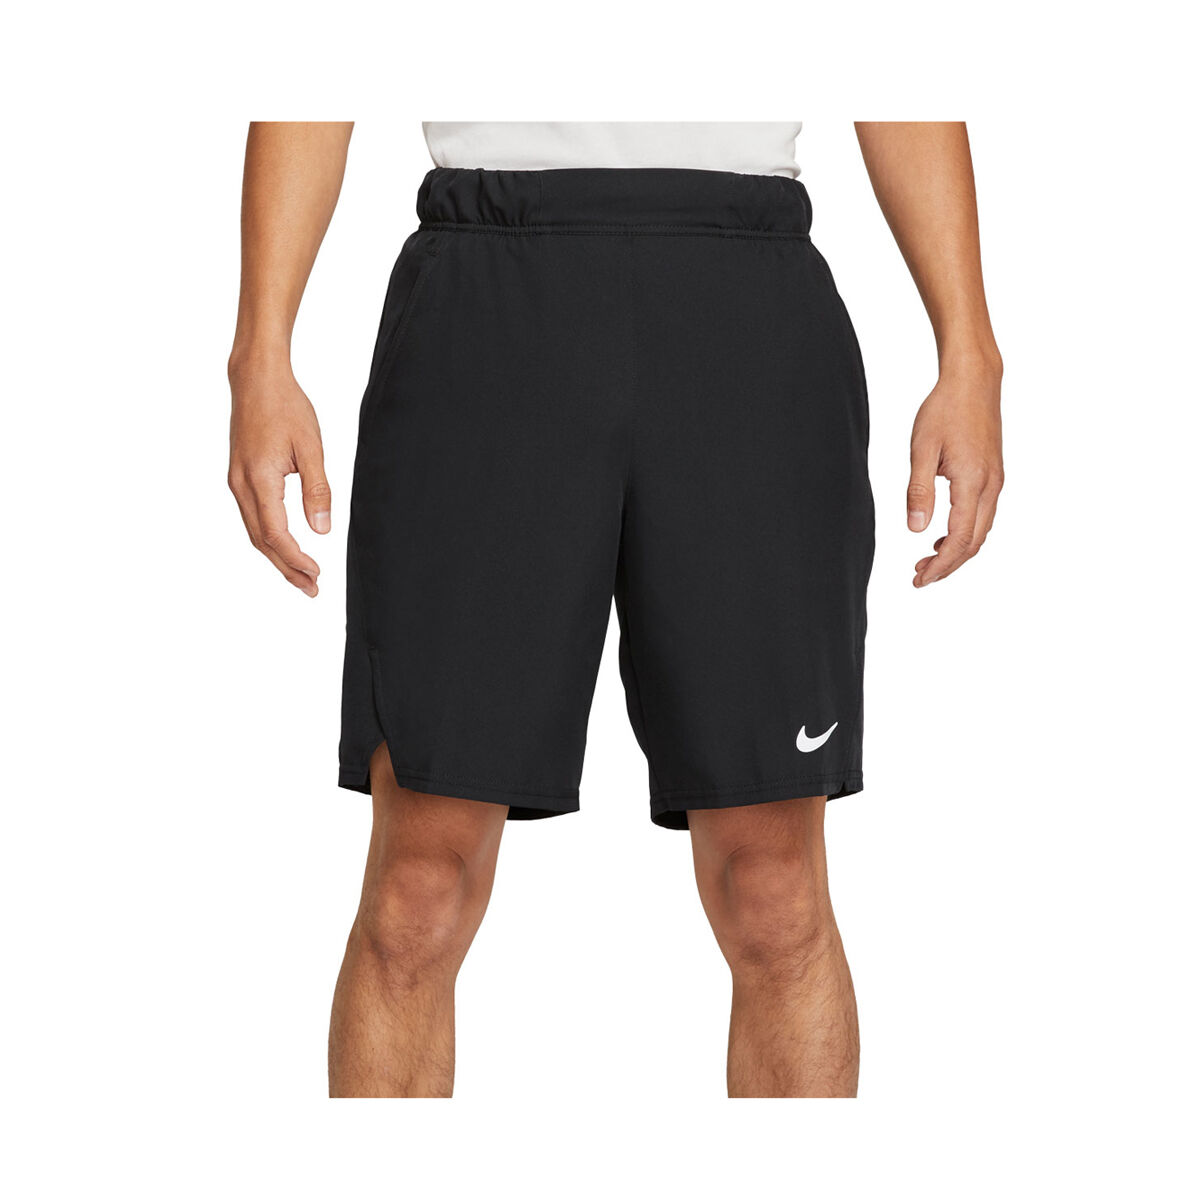 VICTORY 3.5 INCH SHORT WMN'S - Sports Contact